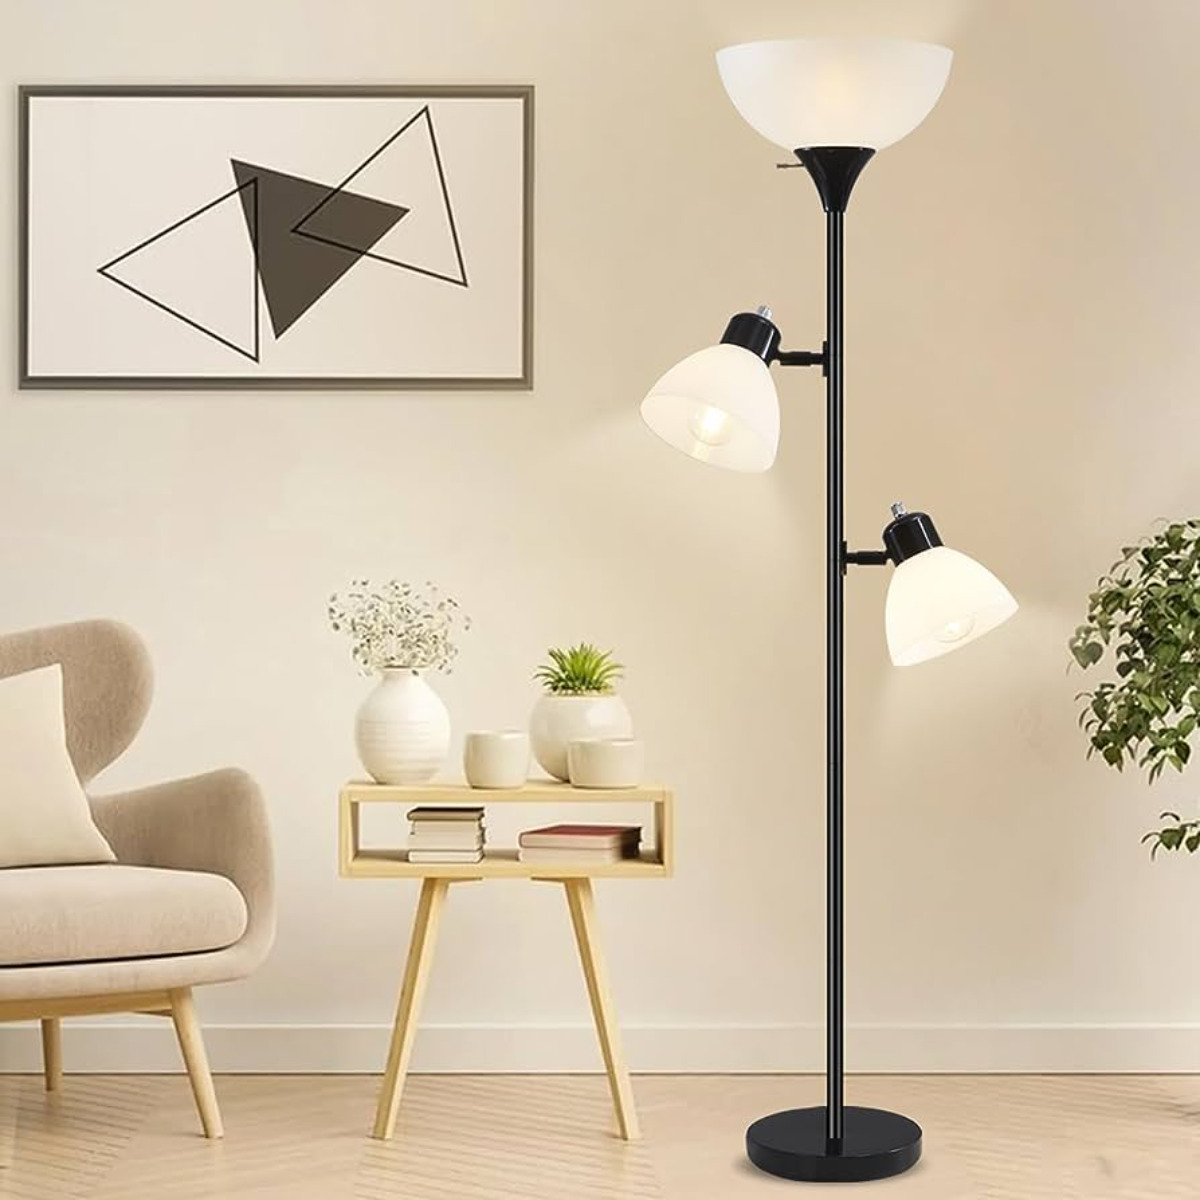 How To Pick A Floor Lamp